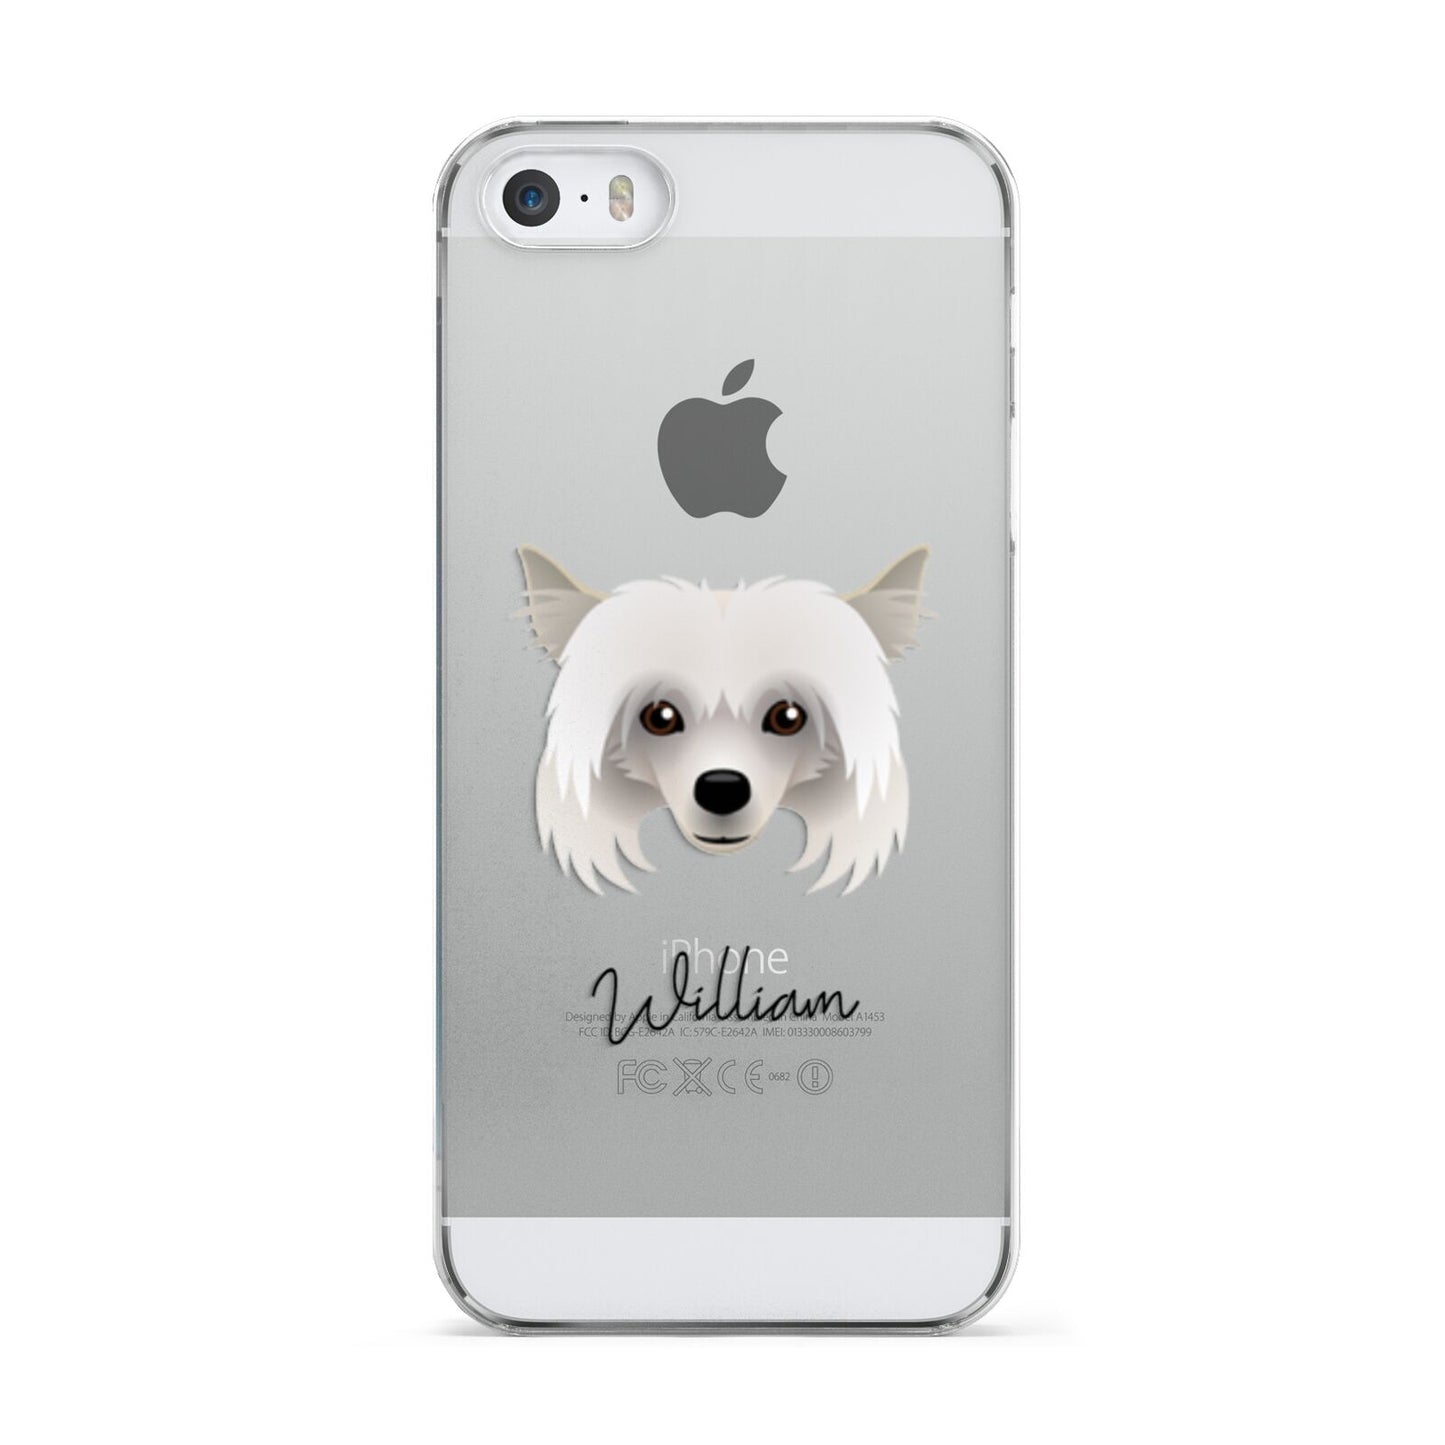 Powderpuff Chinese Crested Personalised Apple iPhone 5 Case